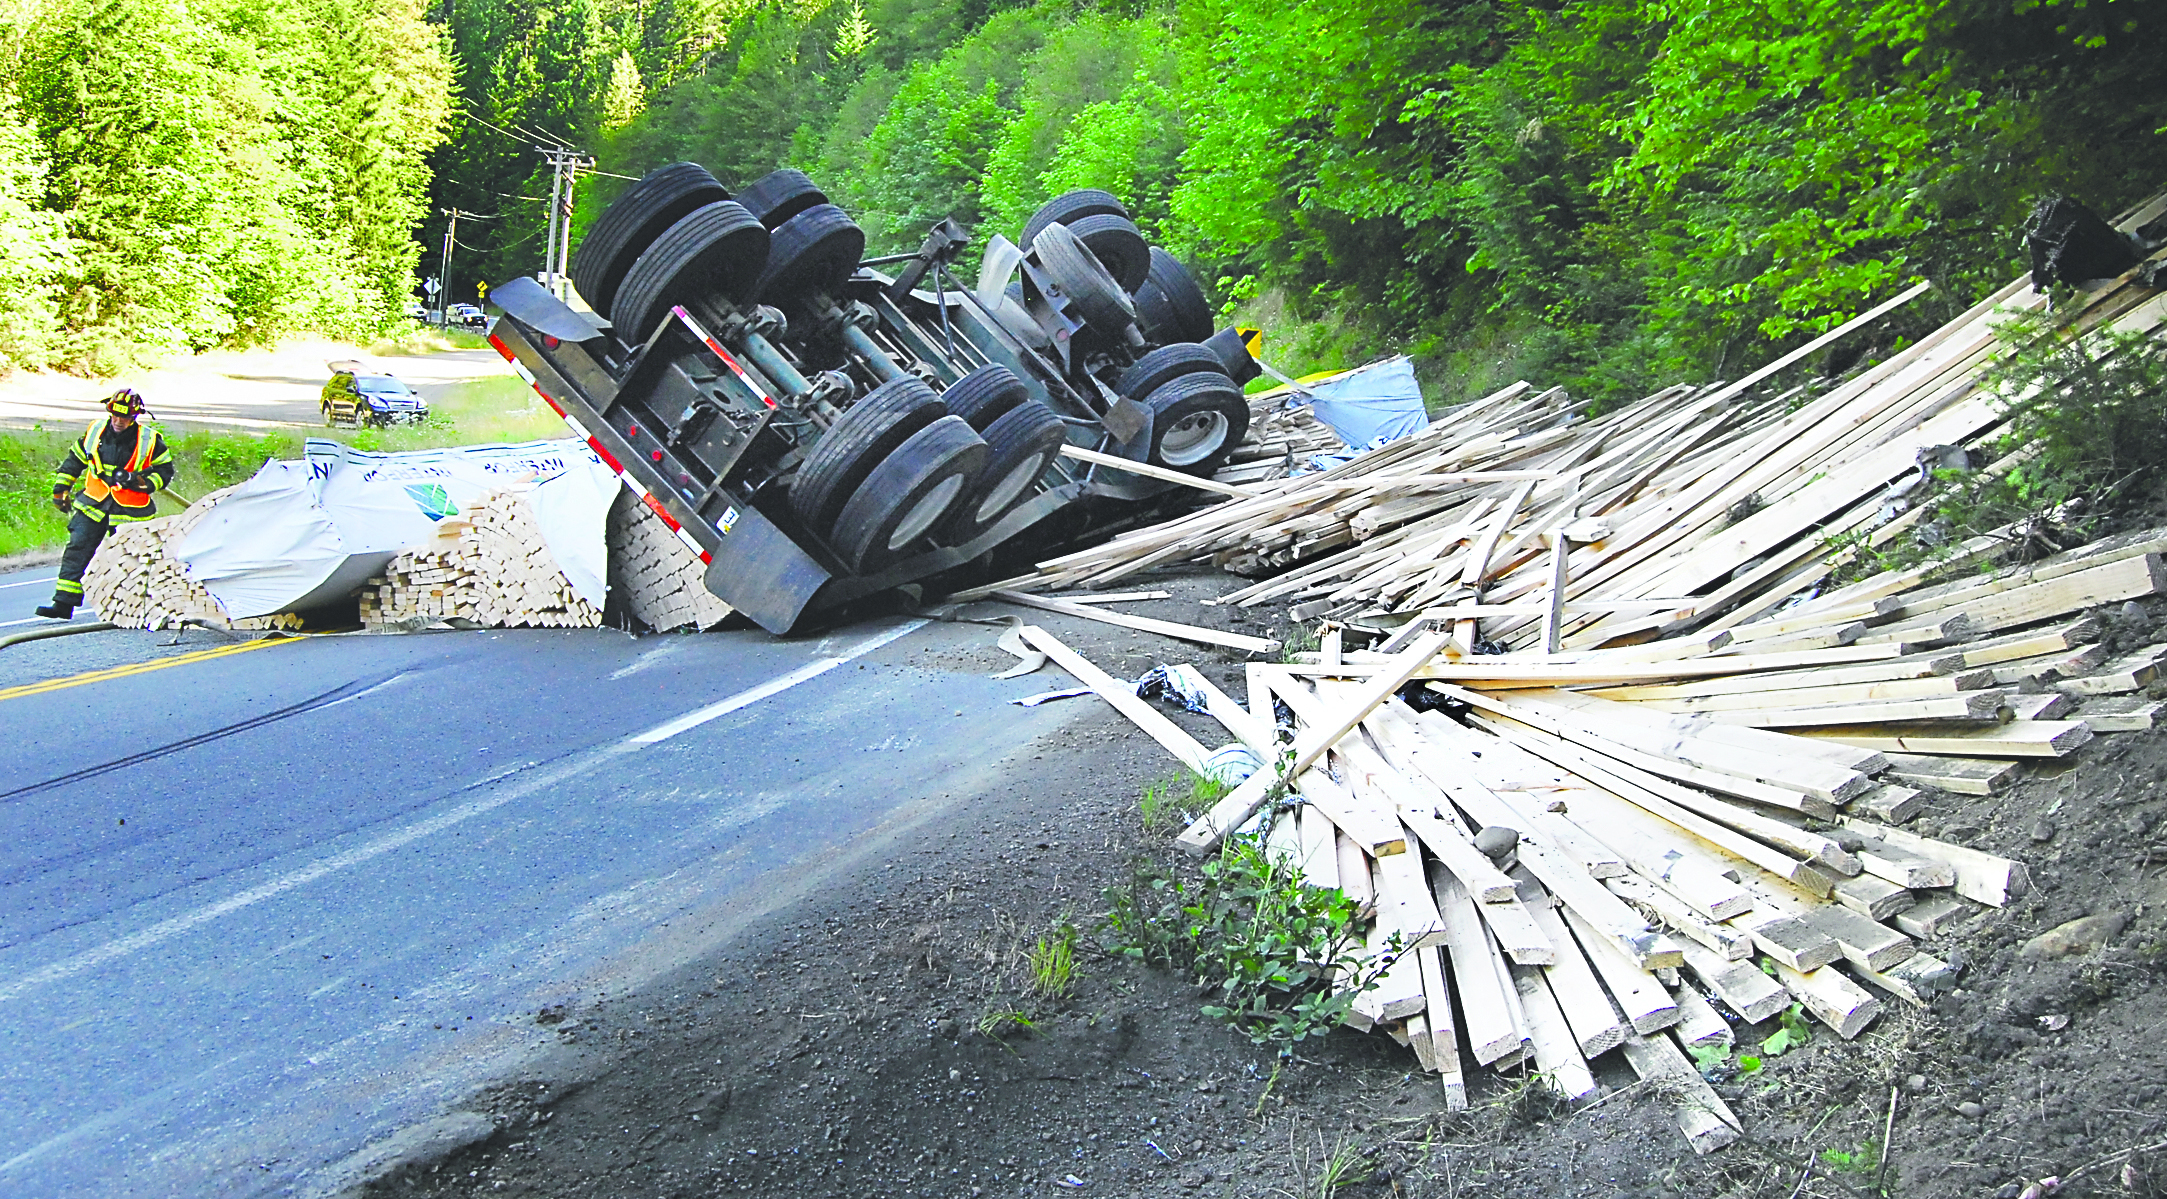 Clallam County Fire District No. 2 Lt. Kevin Thompson pulls a fire hose around the scene of an overturned semi-trailer combination carrying lumber on U.S. Highway 101 at Olympic Hot Springs Road this morning. Keith Thorpe/Peninsula Daily News